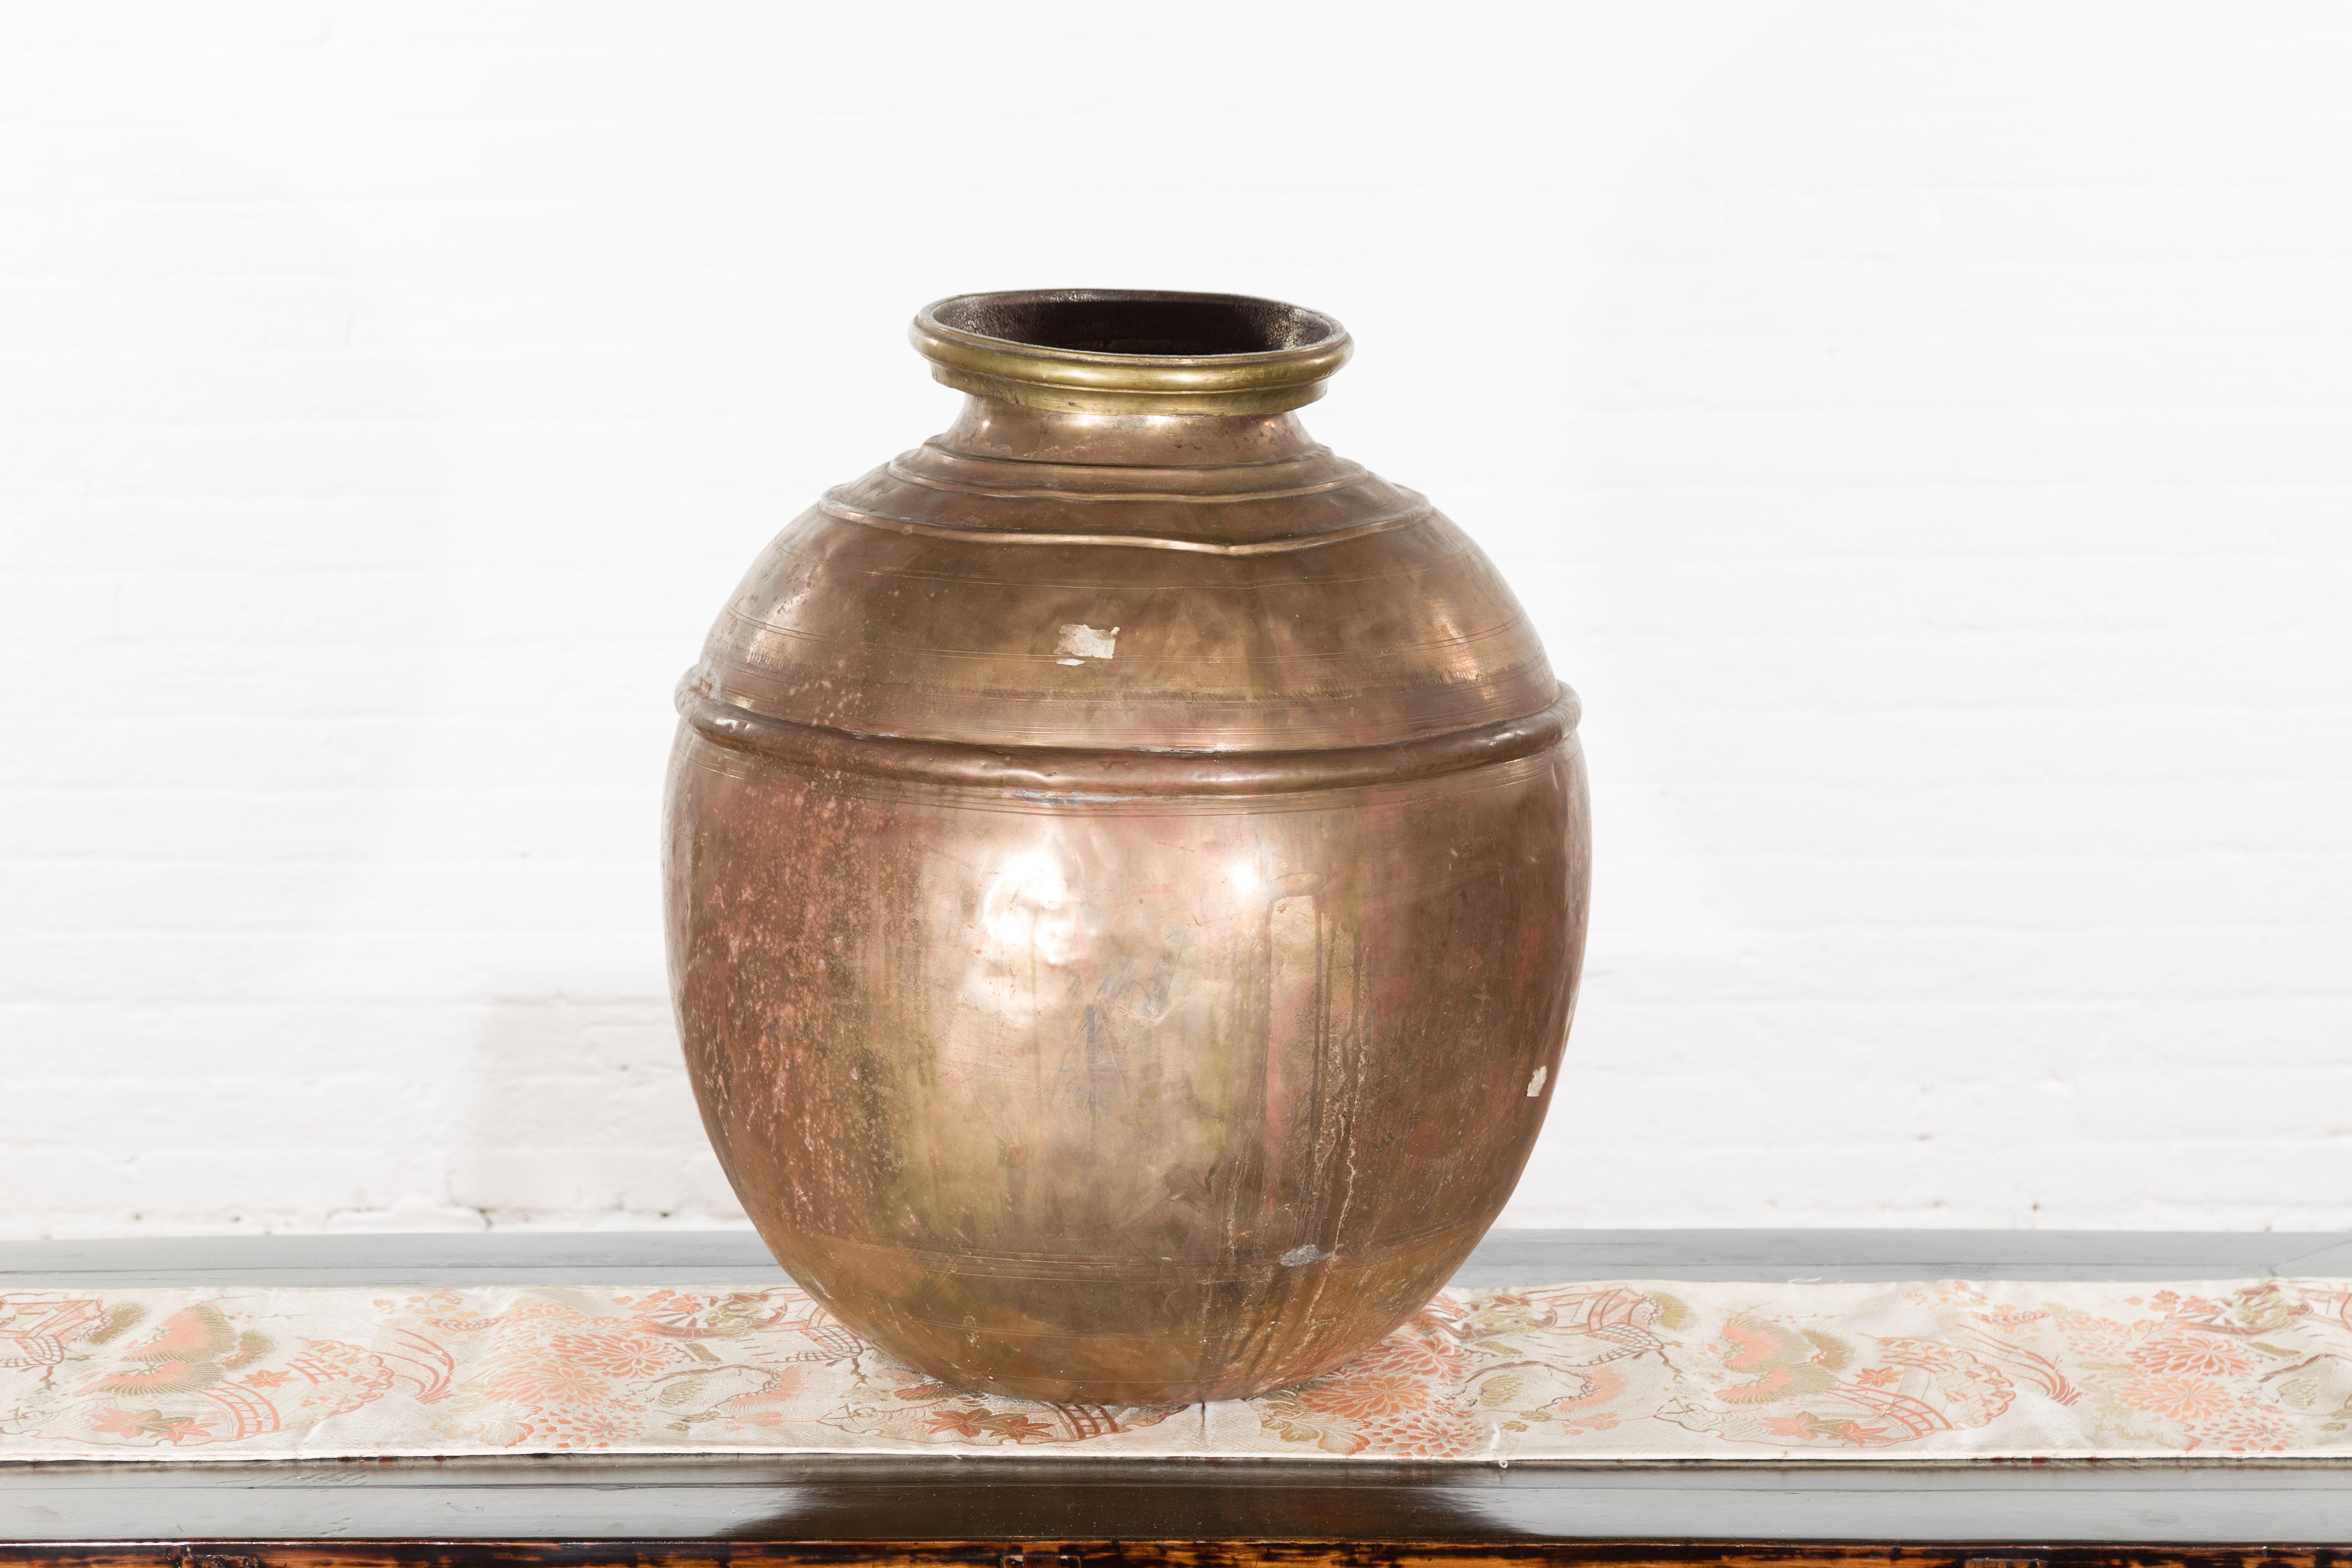 An Indian vintage brass water jar from the mid 20th century, with distressed appearance. Created in India during the midcentury period, this brass water jar features a generous circular body with concentric motifs, topped with a large lip. Boasting